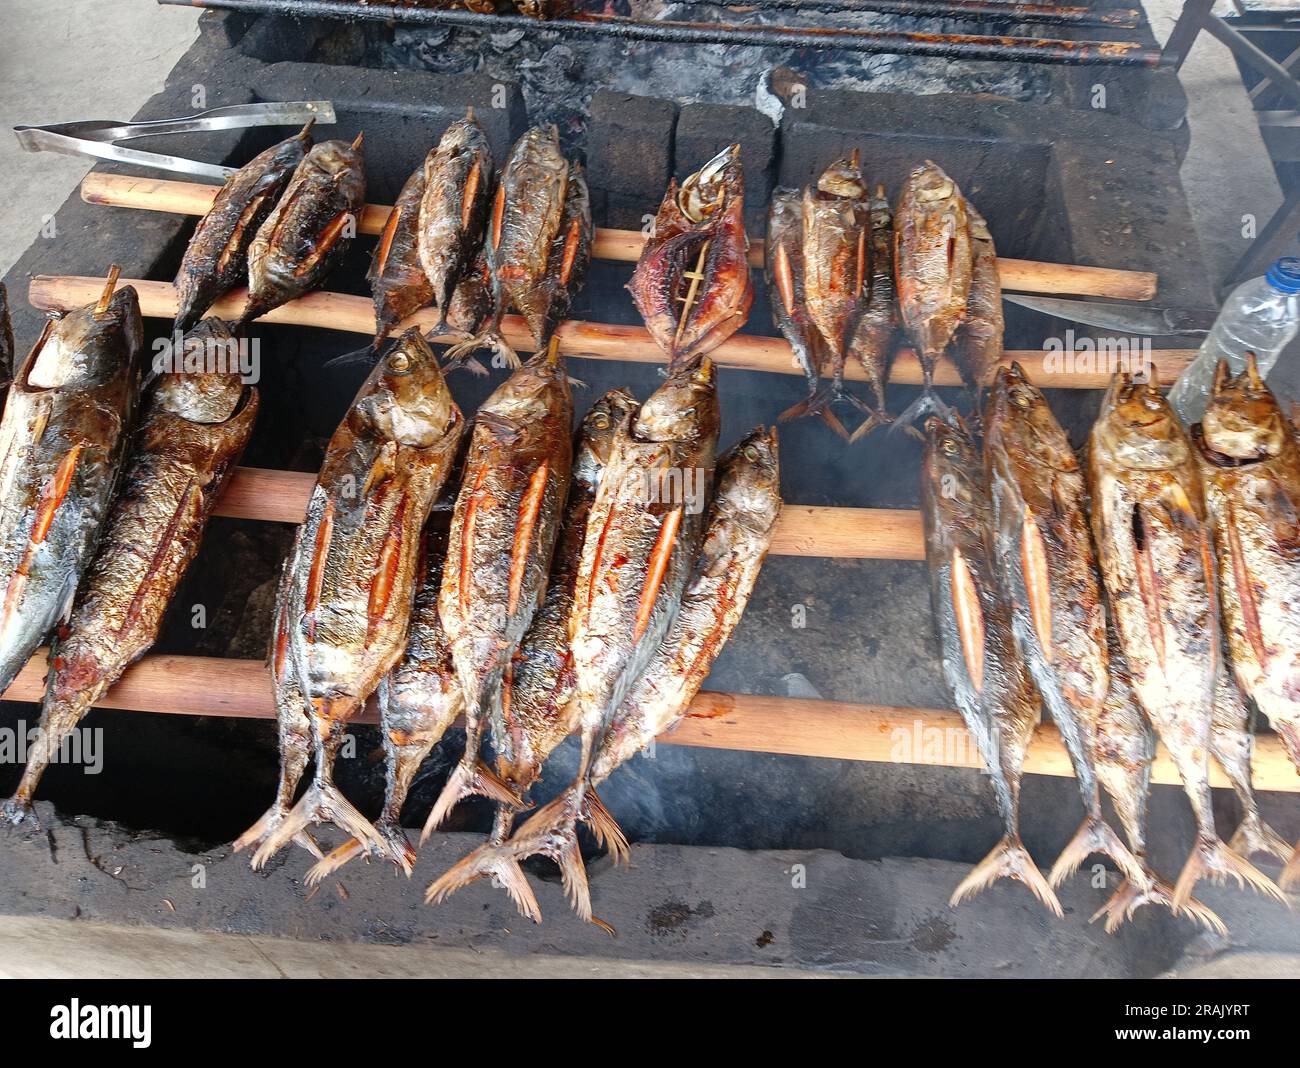 Fufu fish is skipjack tuna or large tuna fish which is smoked. The smoke comes from burning coconut shells until the meat is cooked. Stock Photo